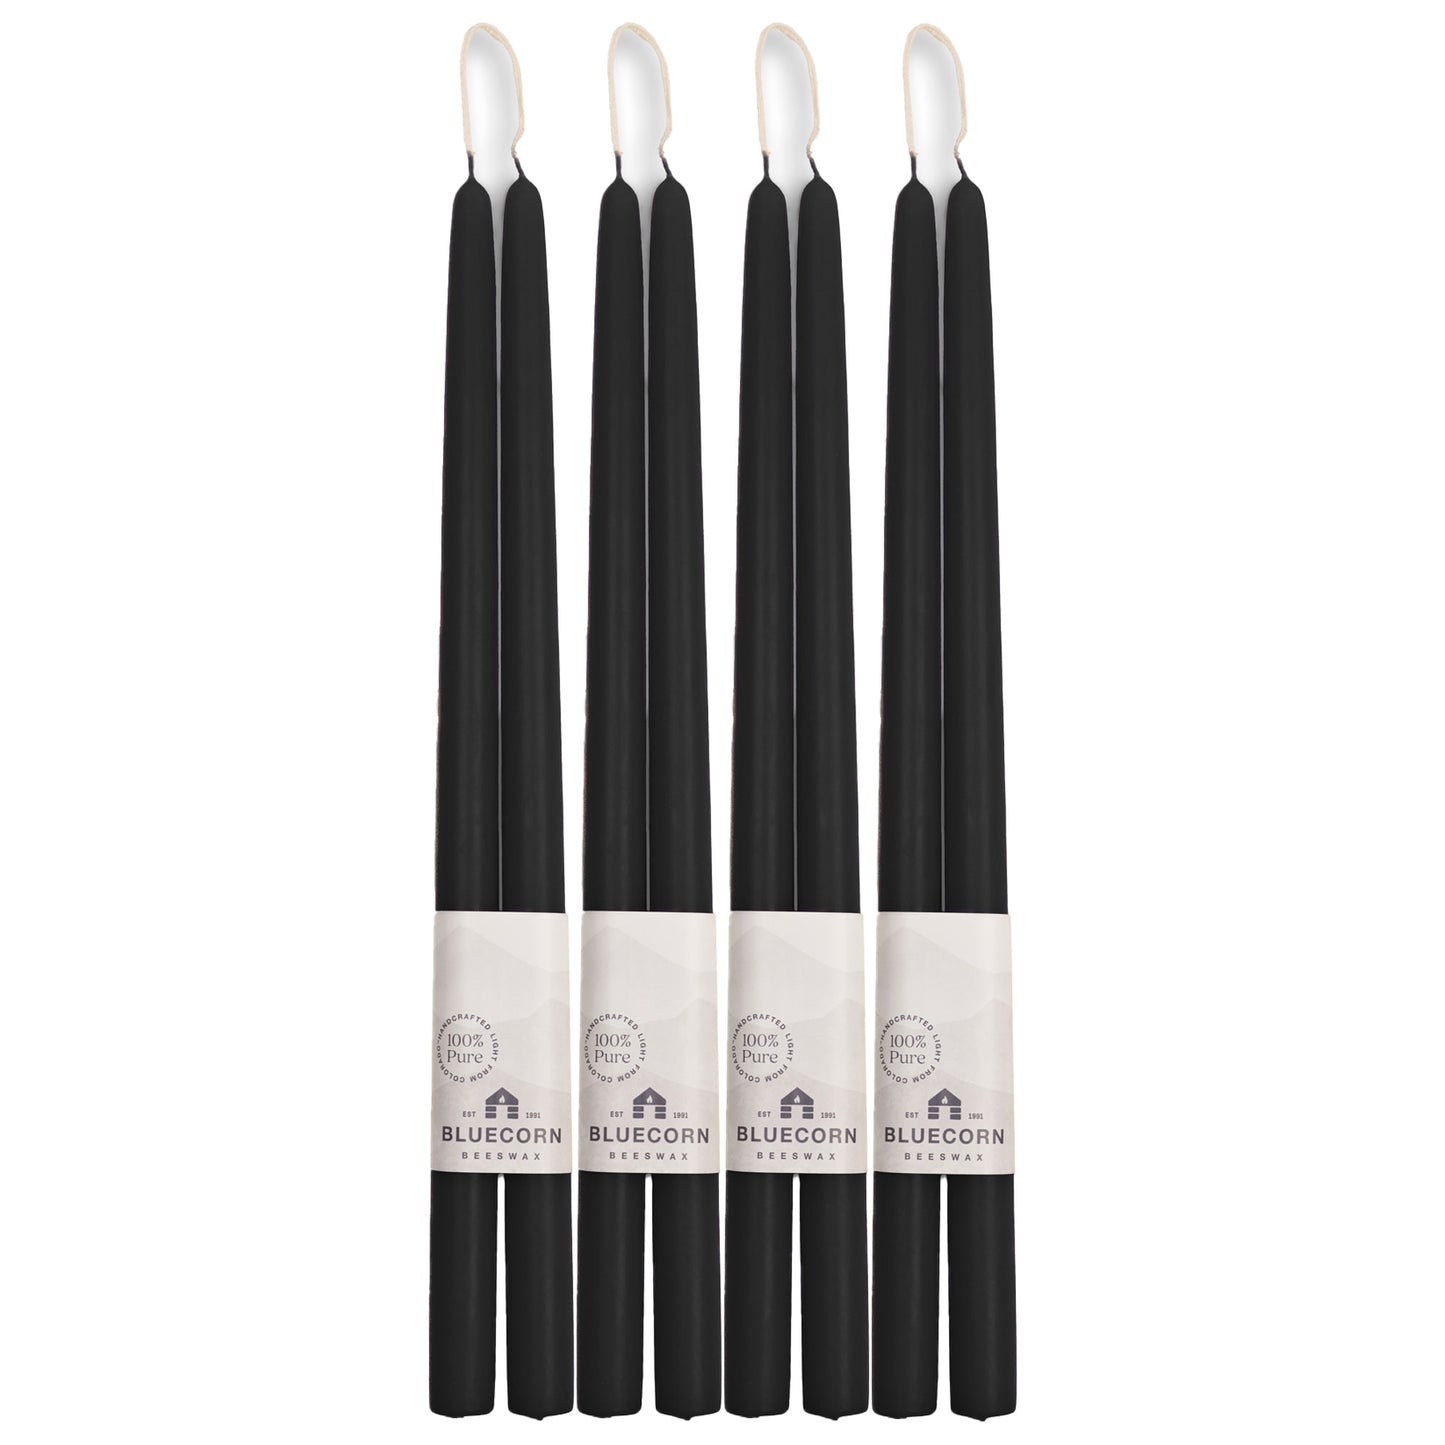 bluecorn candles dramatic tall black beeswax taper candles